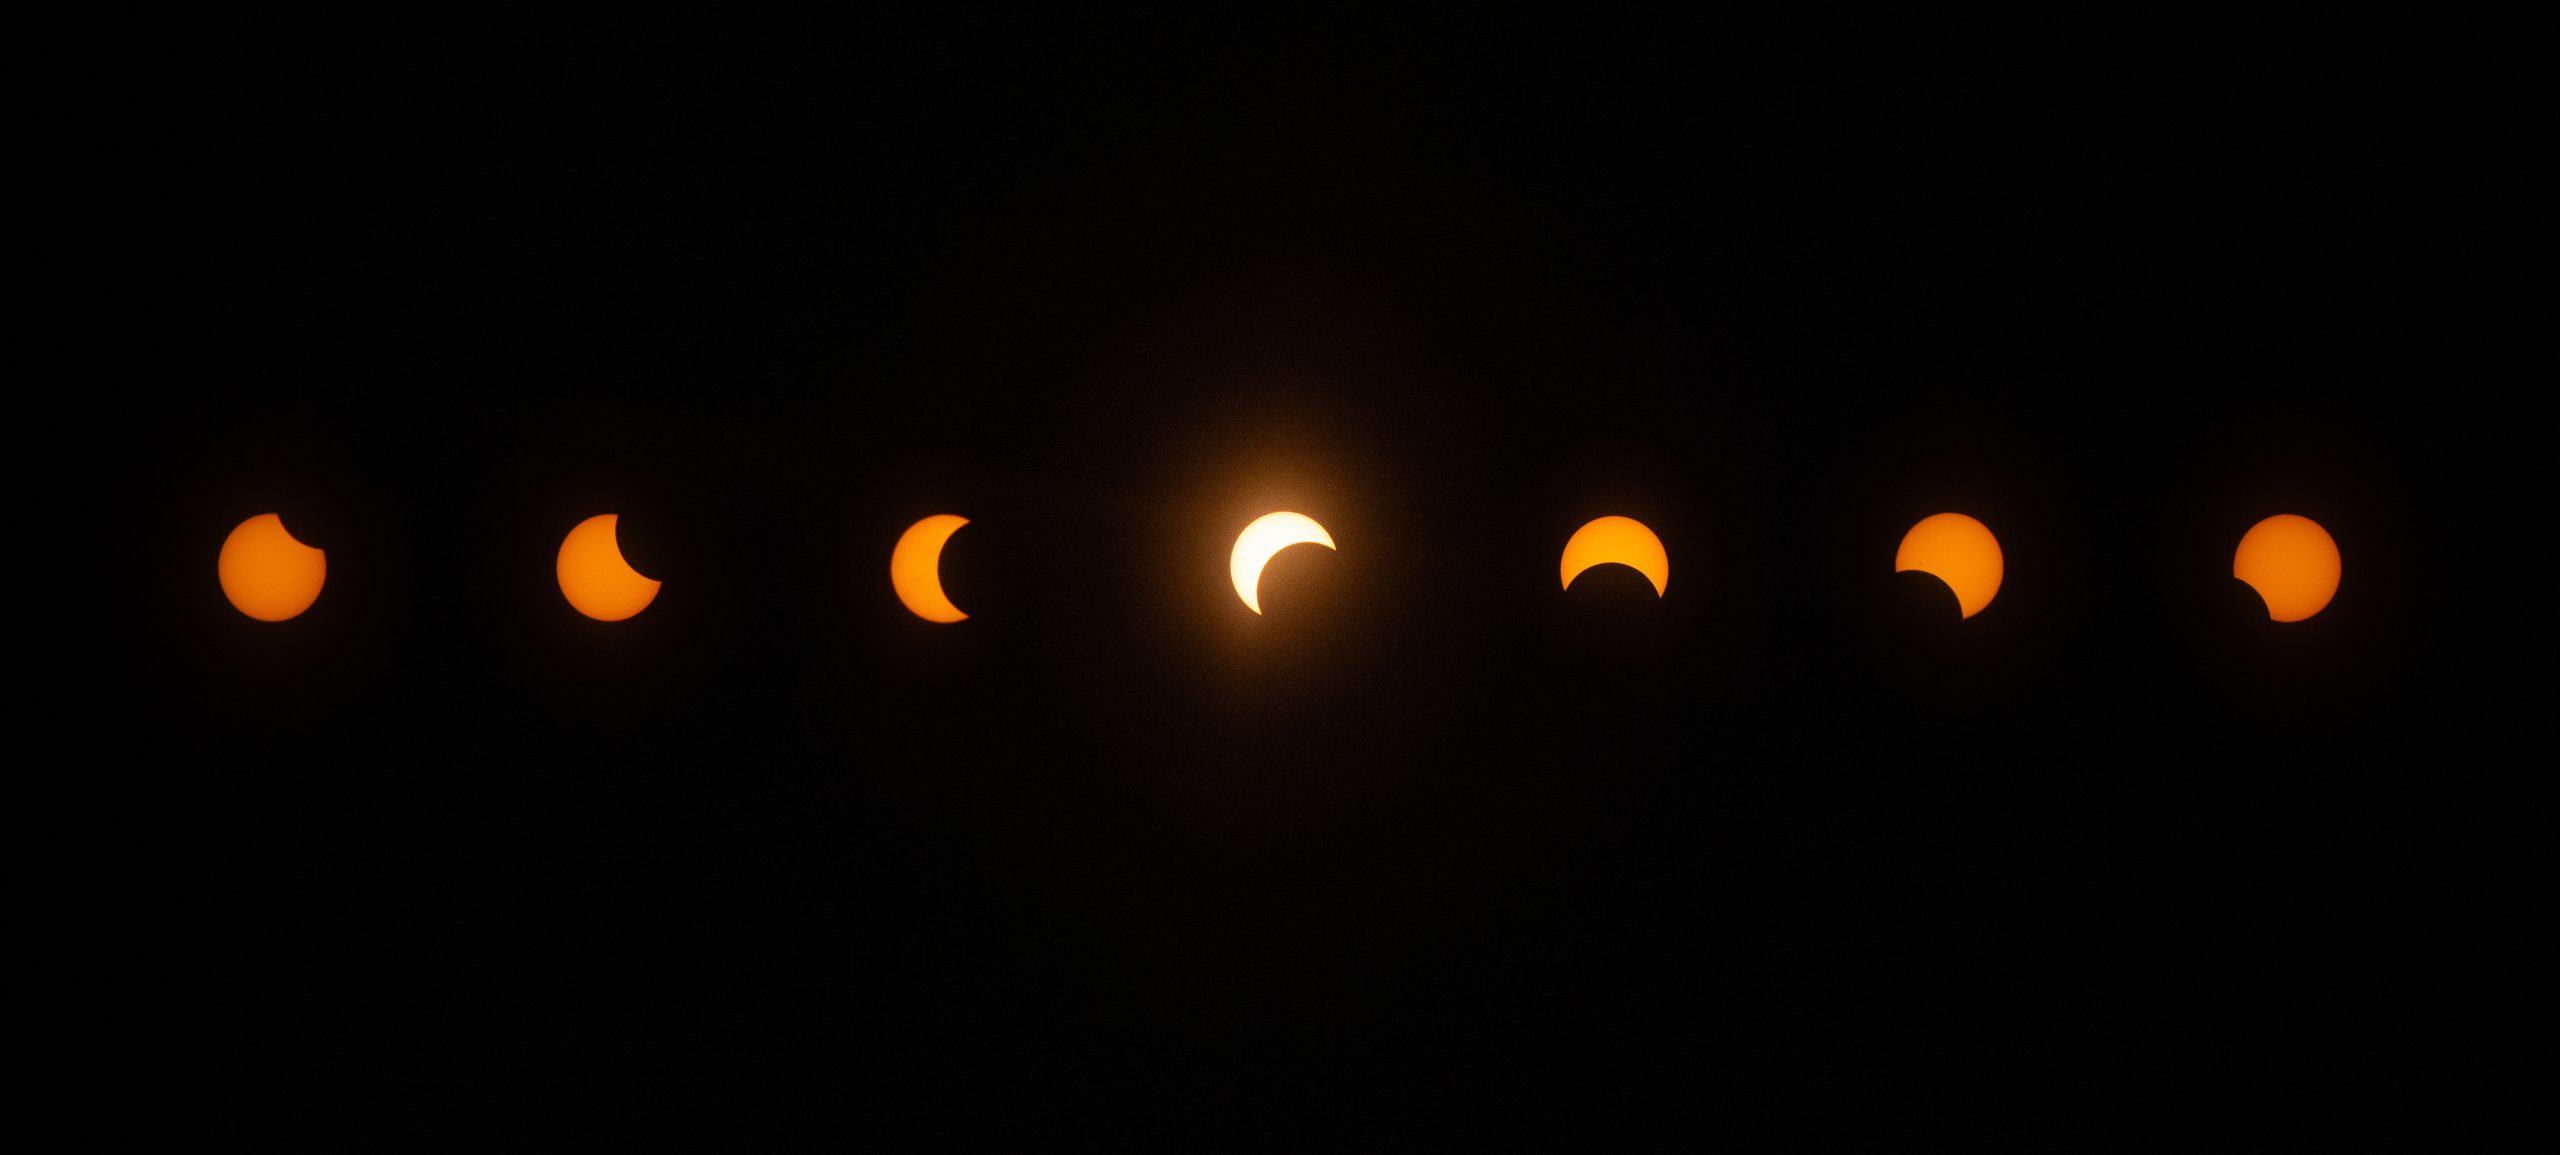 Partial Solar Eclipse Observed During UF Astronomy Event